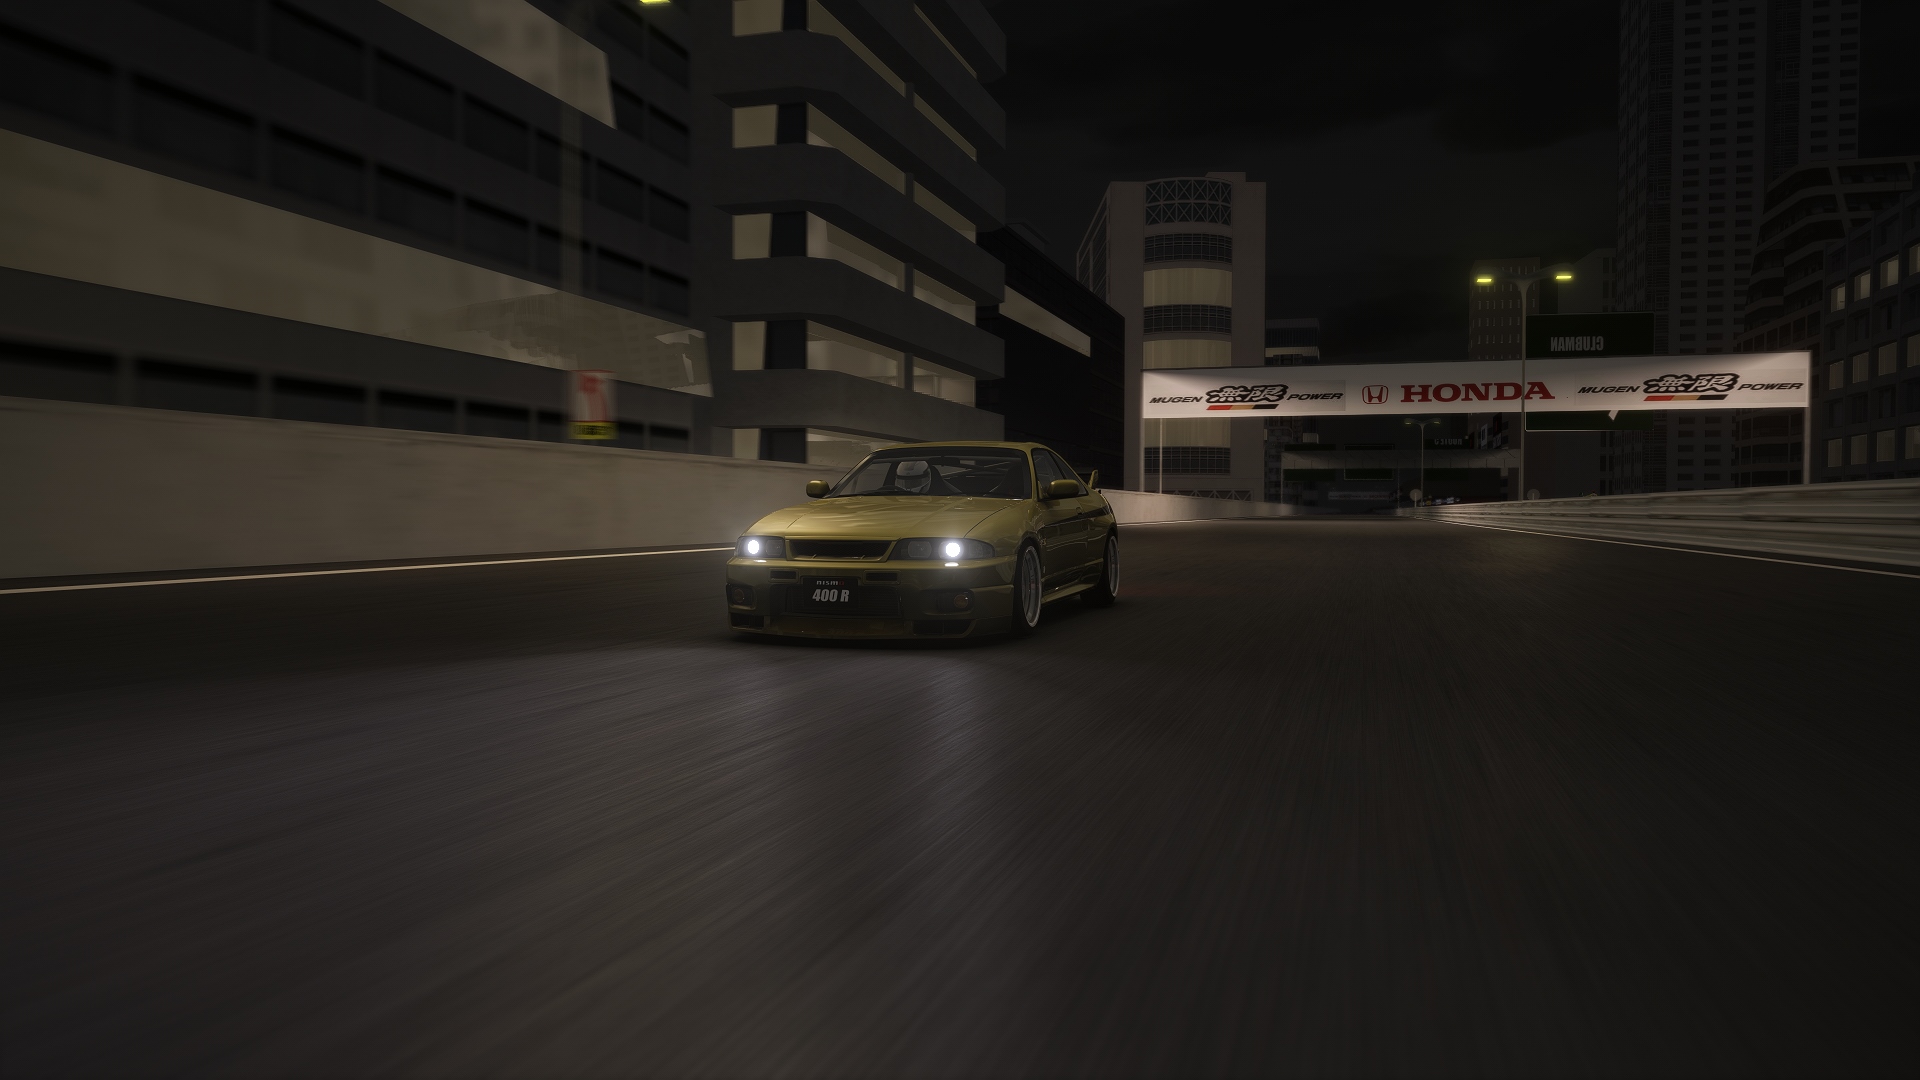 Screenshot_sts_r33_gtr_s3_n1_tuned_400r_special_stage_route_5_3-6-121-1-52-17.jpg